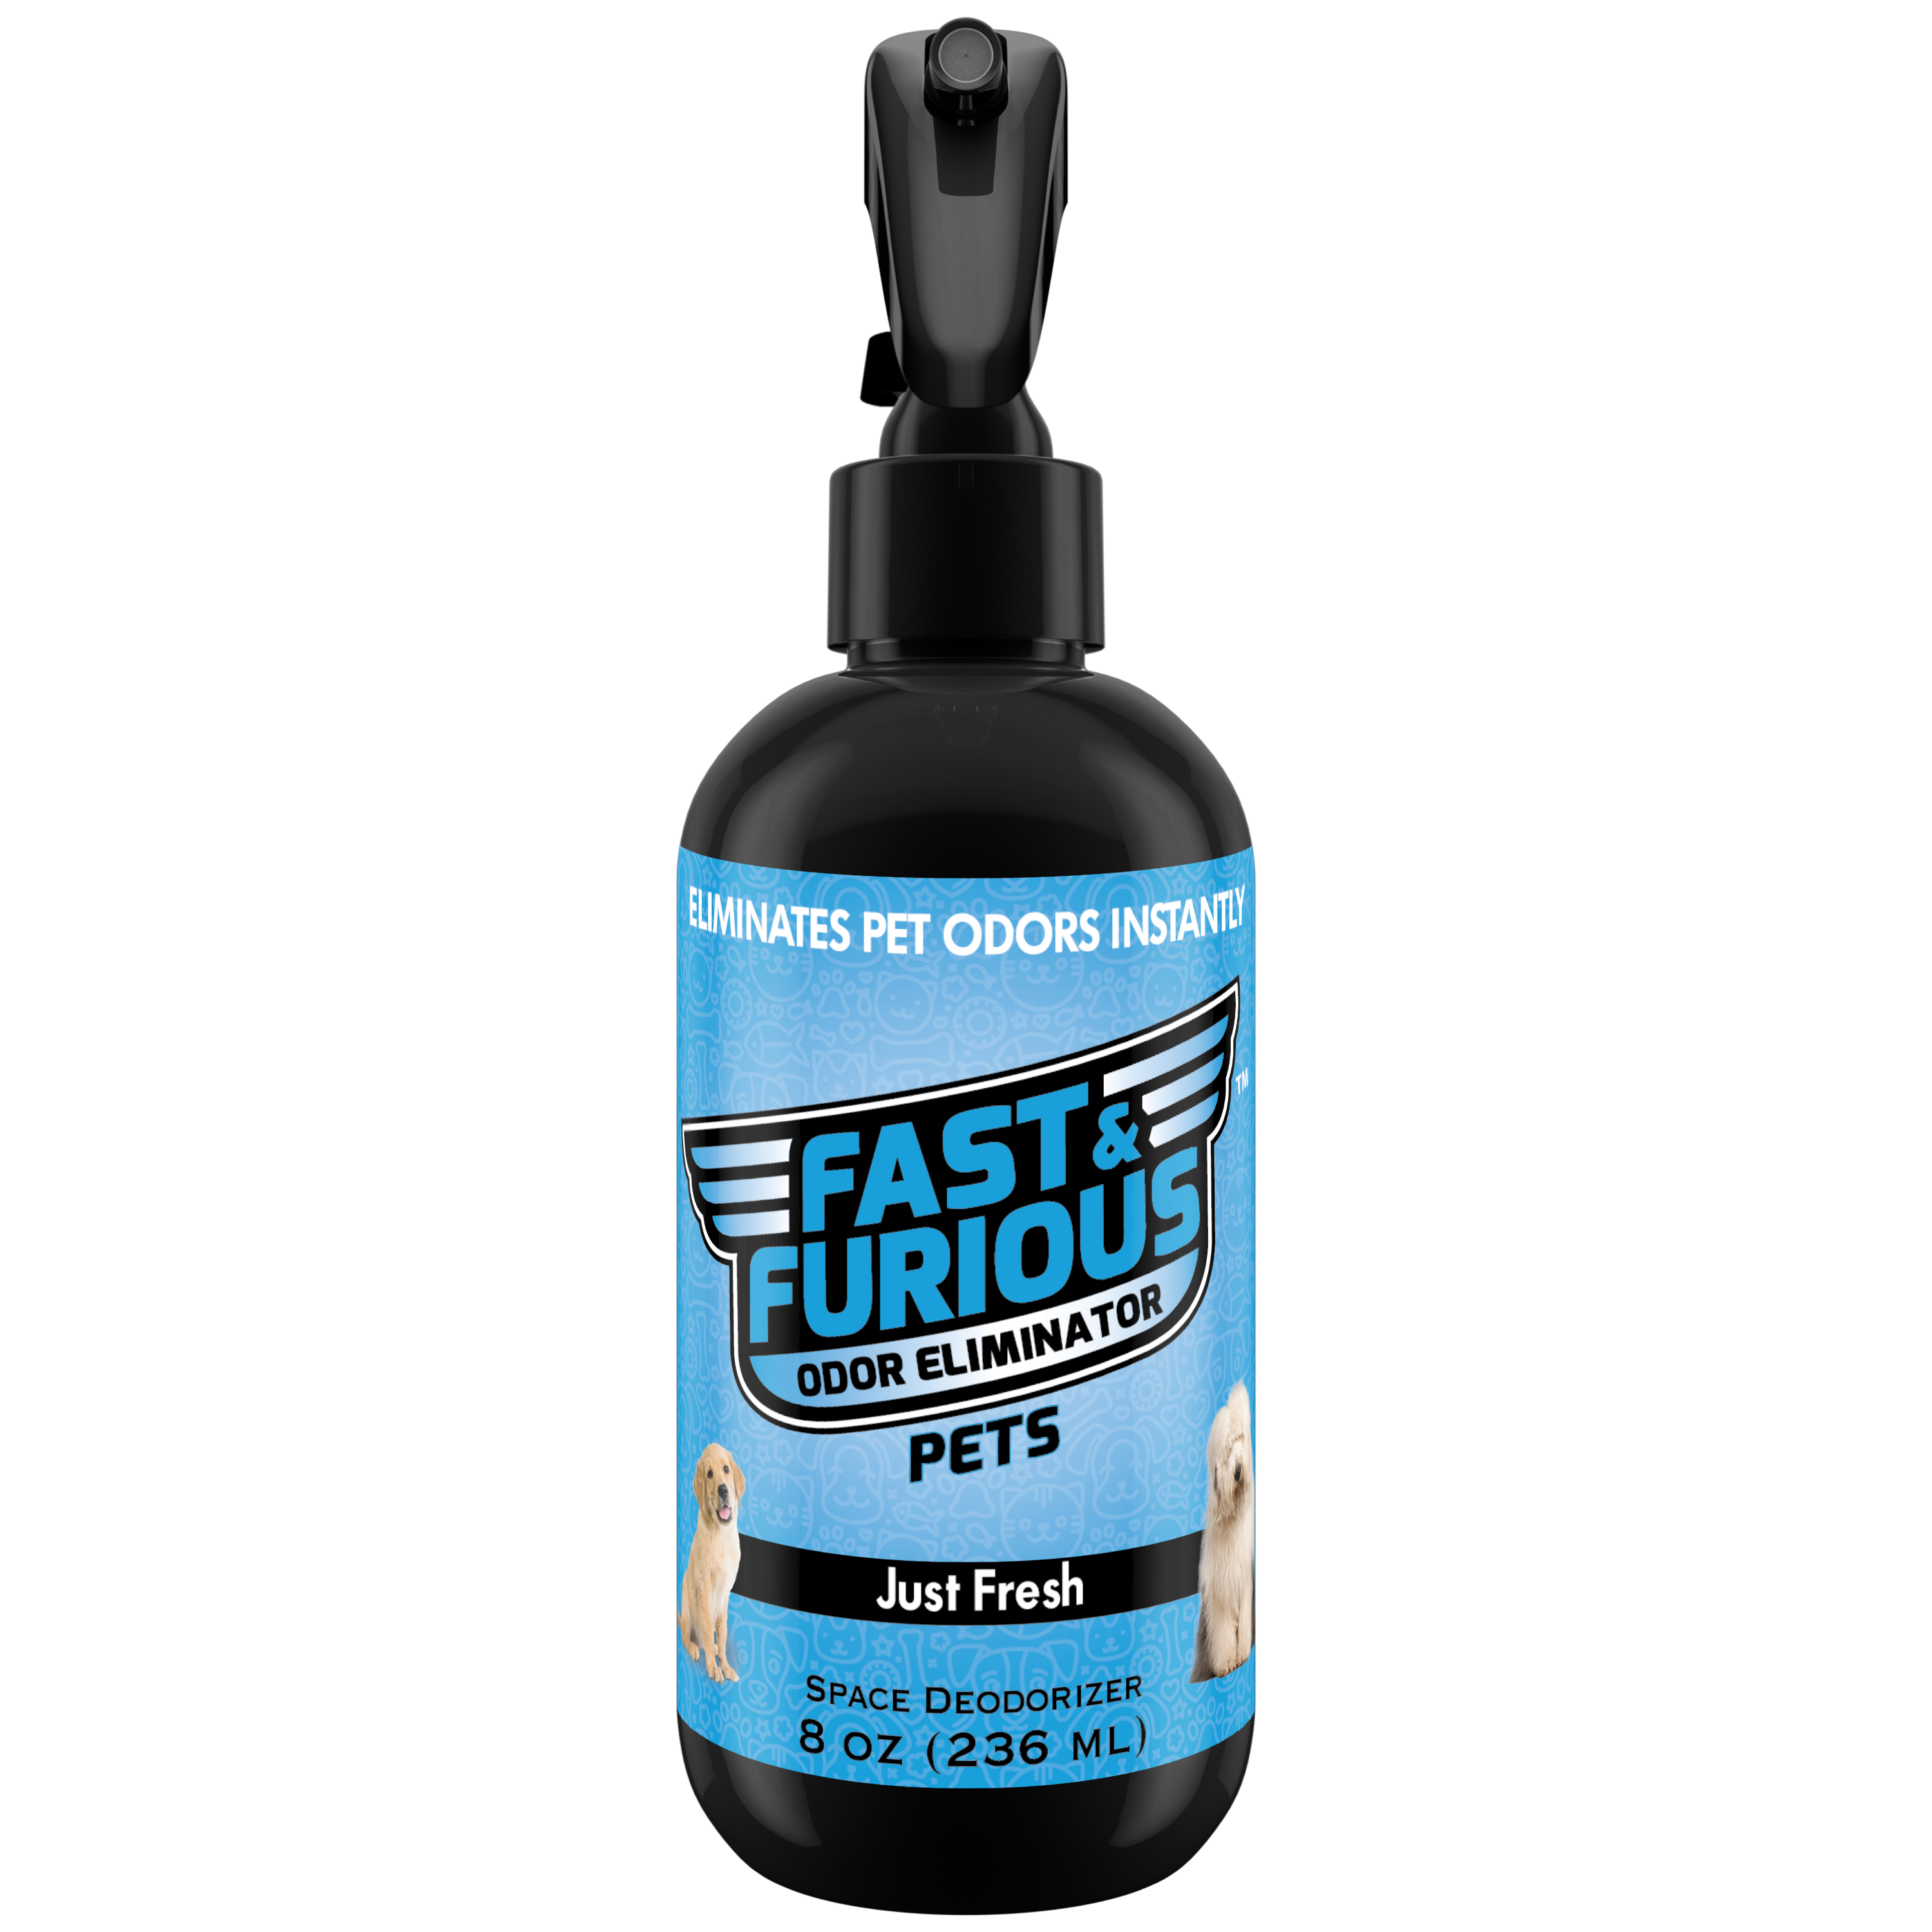 Fast and Furious Pets Odor Eliminator - Just Fresh Scent